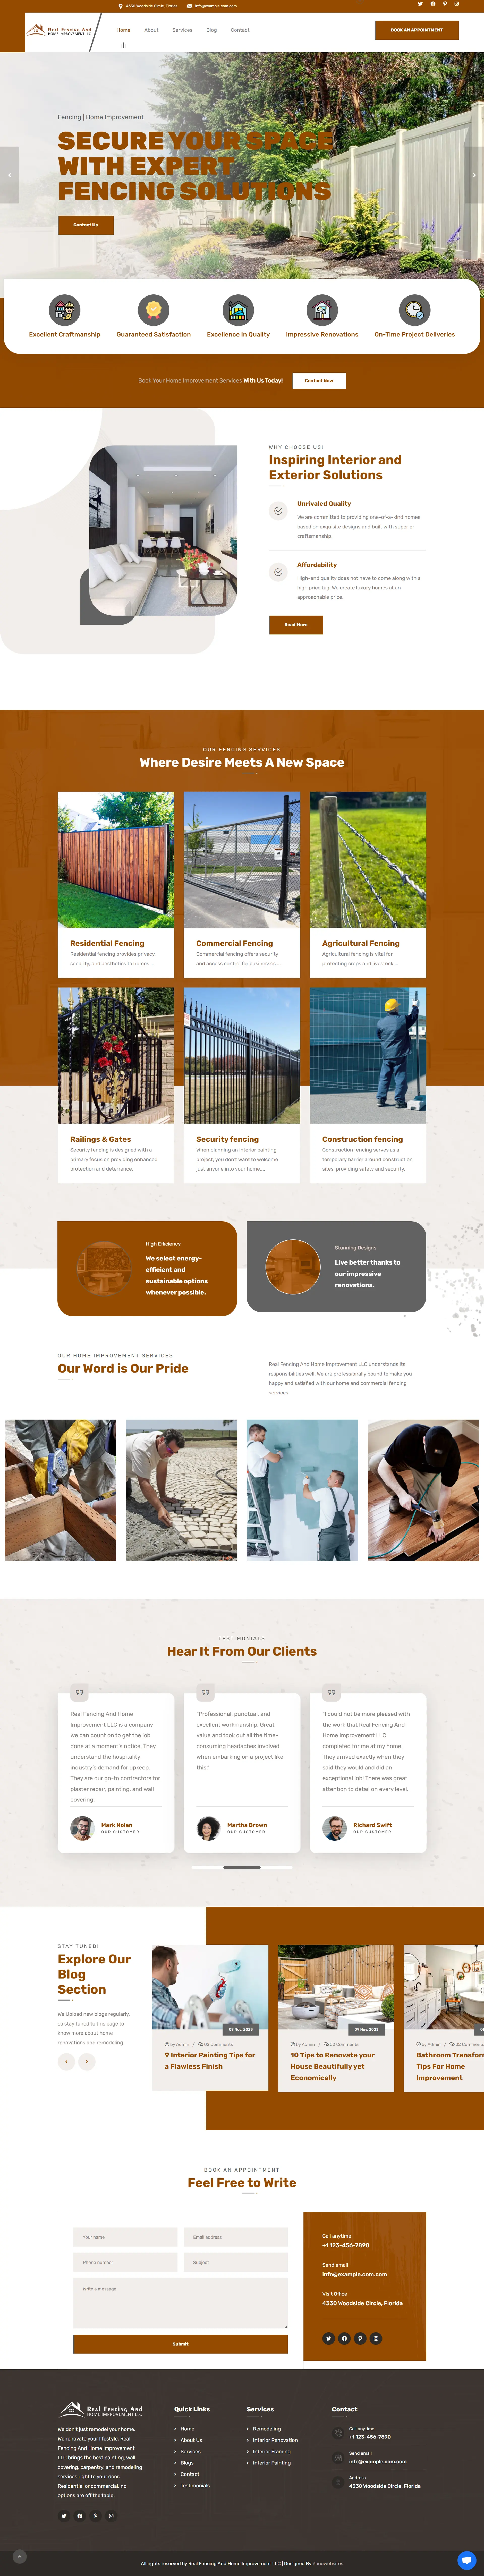 Highly Customizable Home Improvement Website Template